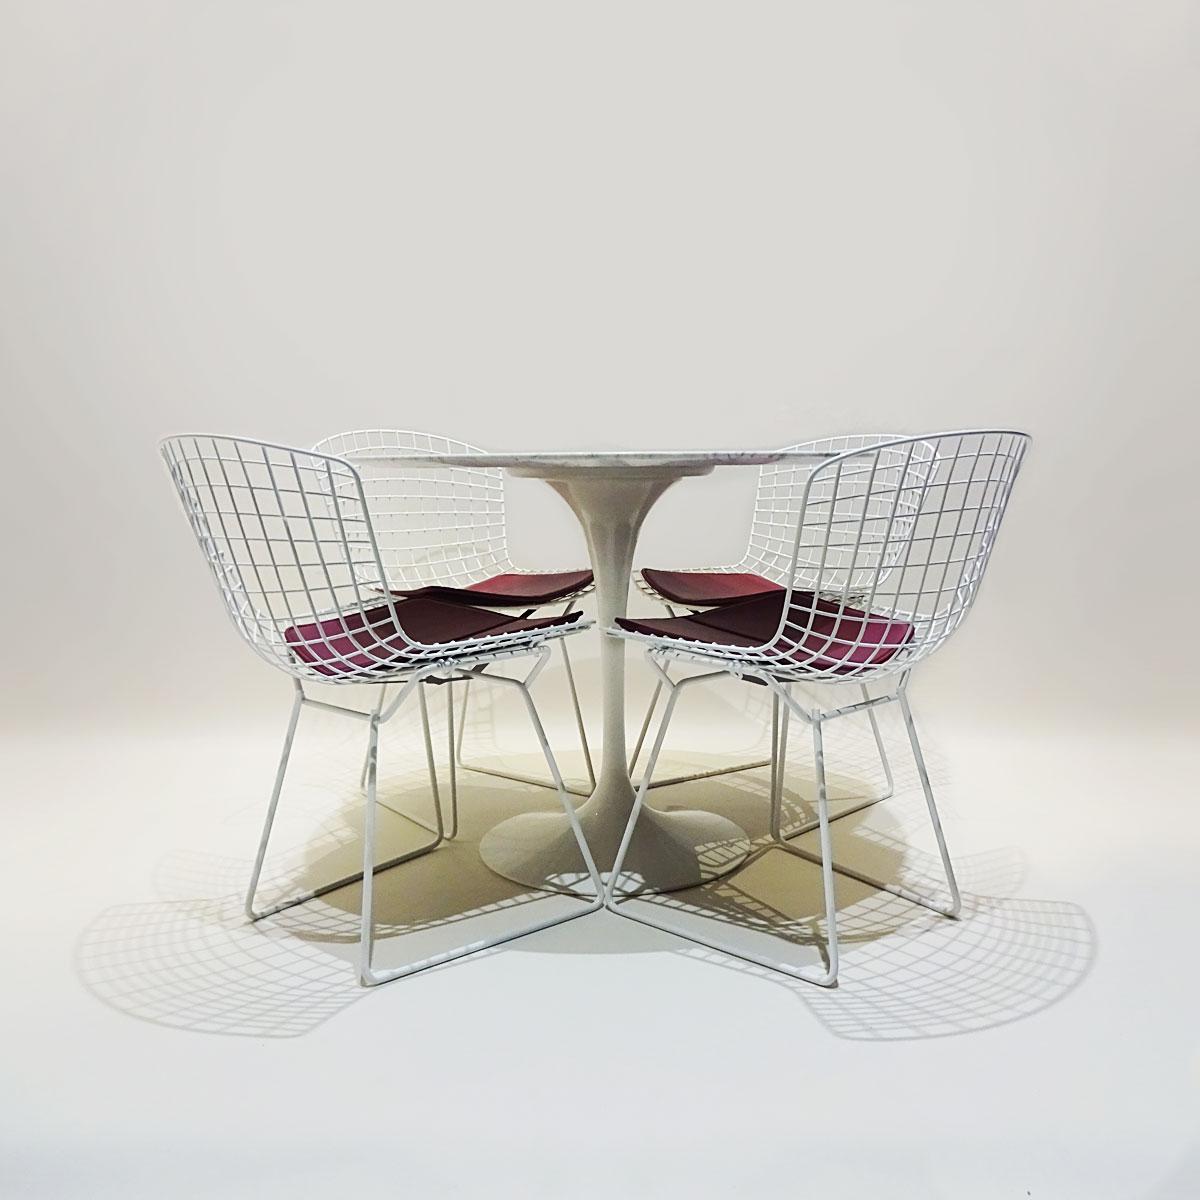 A classic mid century dining set comprising an original white marble Eero Saarinen round tulip dining table matched to 4 x white Harry Bertoia wire chairs with original seat pads.

This is a classic combination of complimentary designs that both